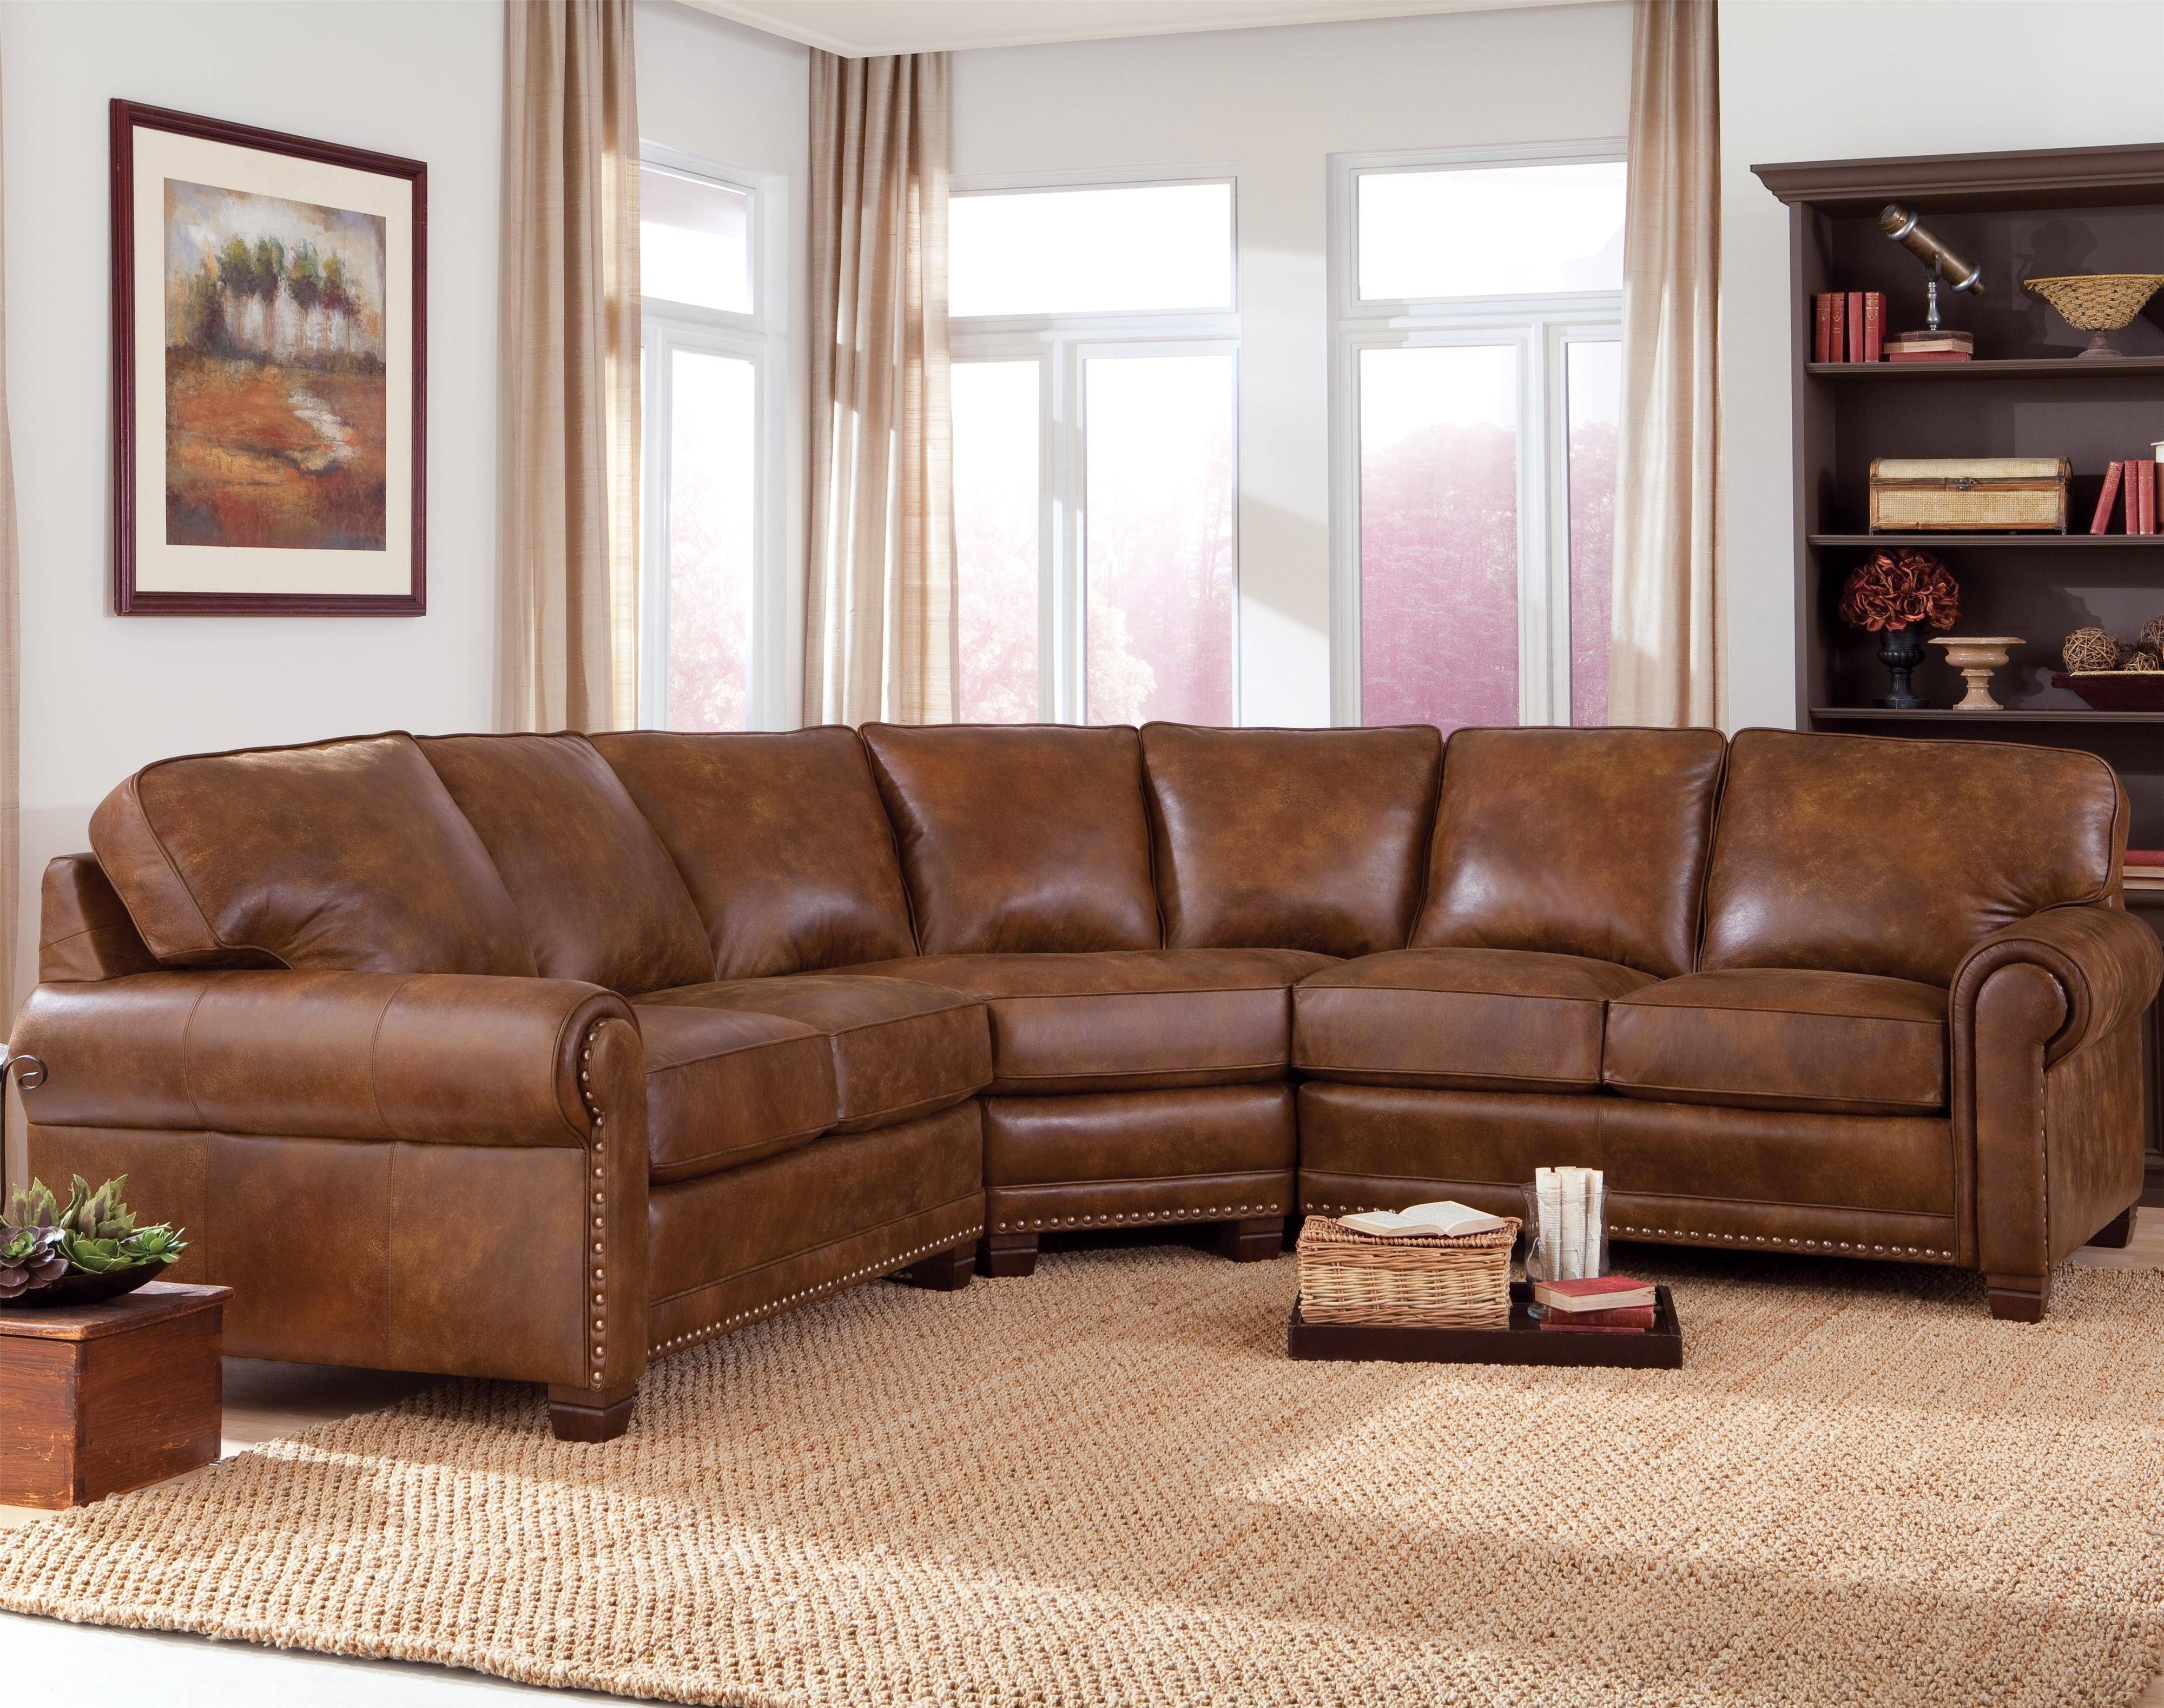 Good Large Sectional Leather Sofas 93 In Jennifer Sofas And Inside Jennifer Sofas And Sectionals (View 15 of 15)